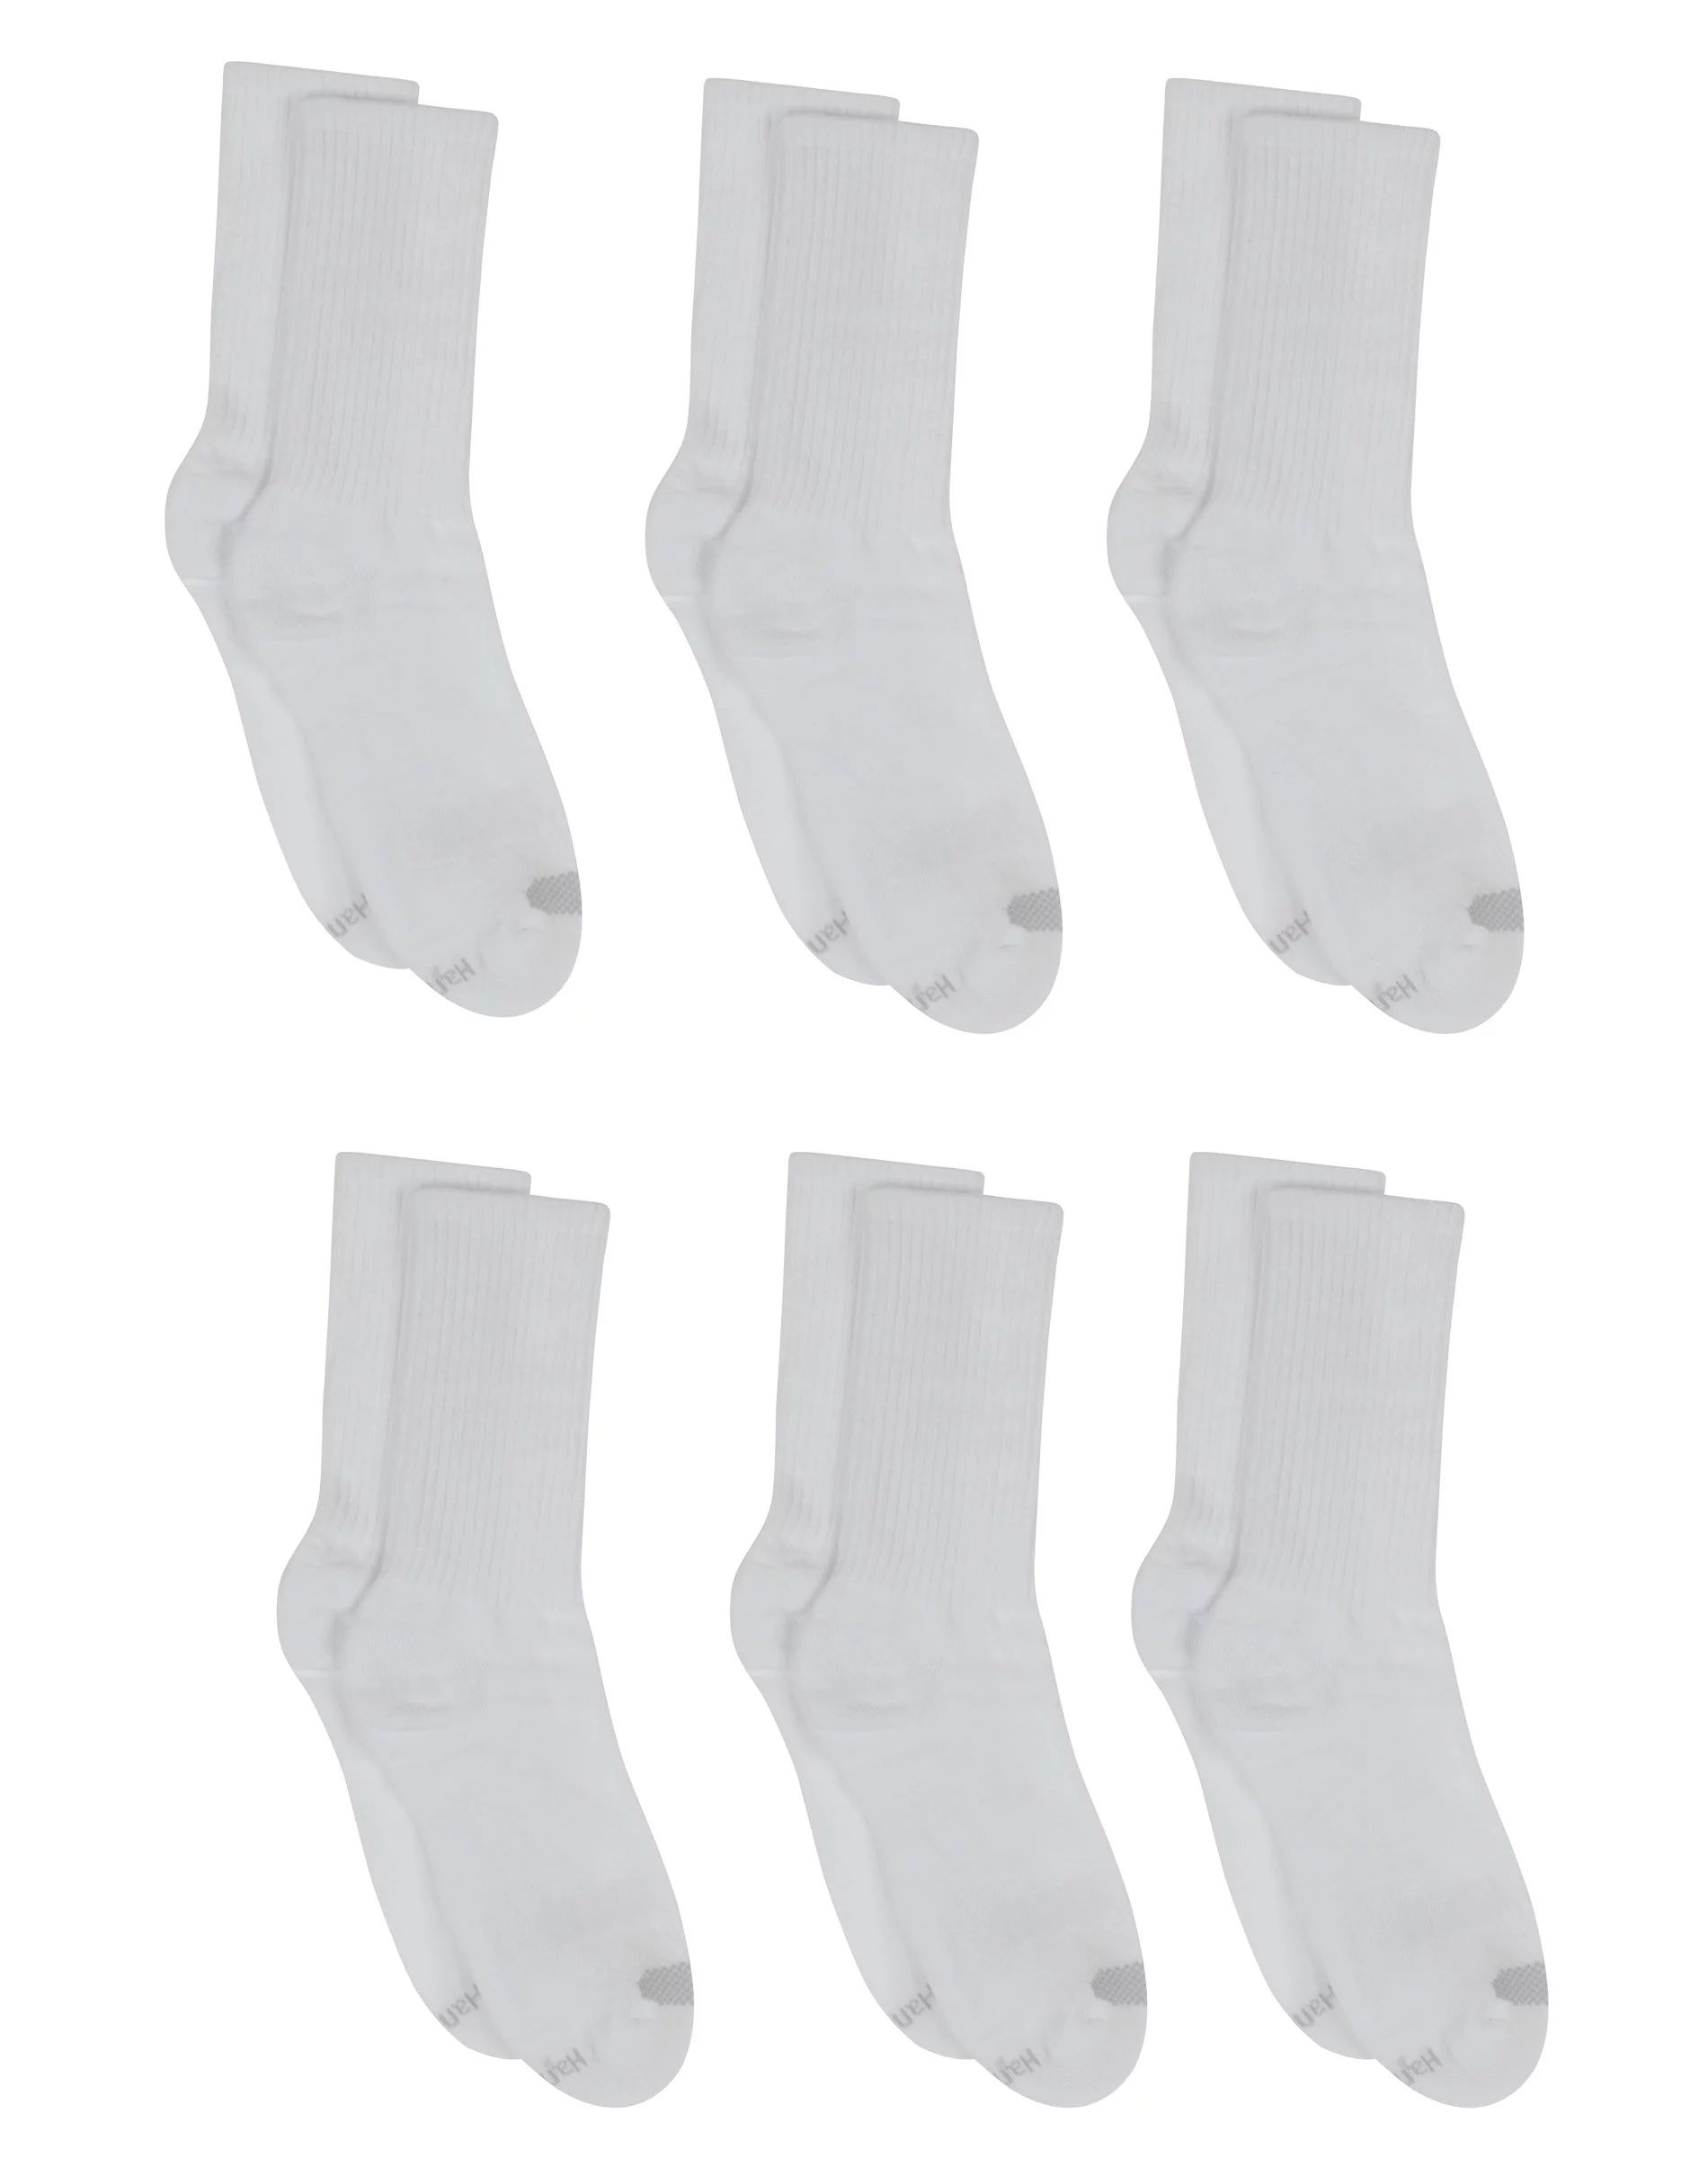 Hanes Women's Breathable Cushioned Crew Socks, Comfort Toe Seam, Extended Sizes 8 - 12, 6-Pairs W... | Walmart (US)